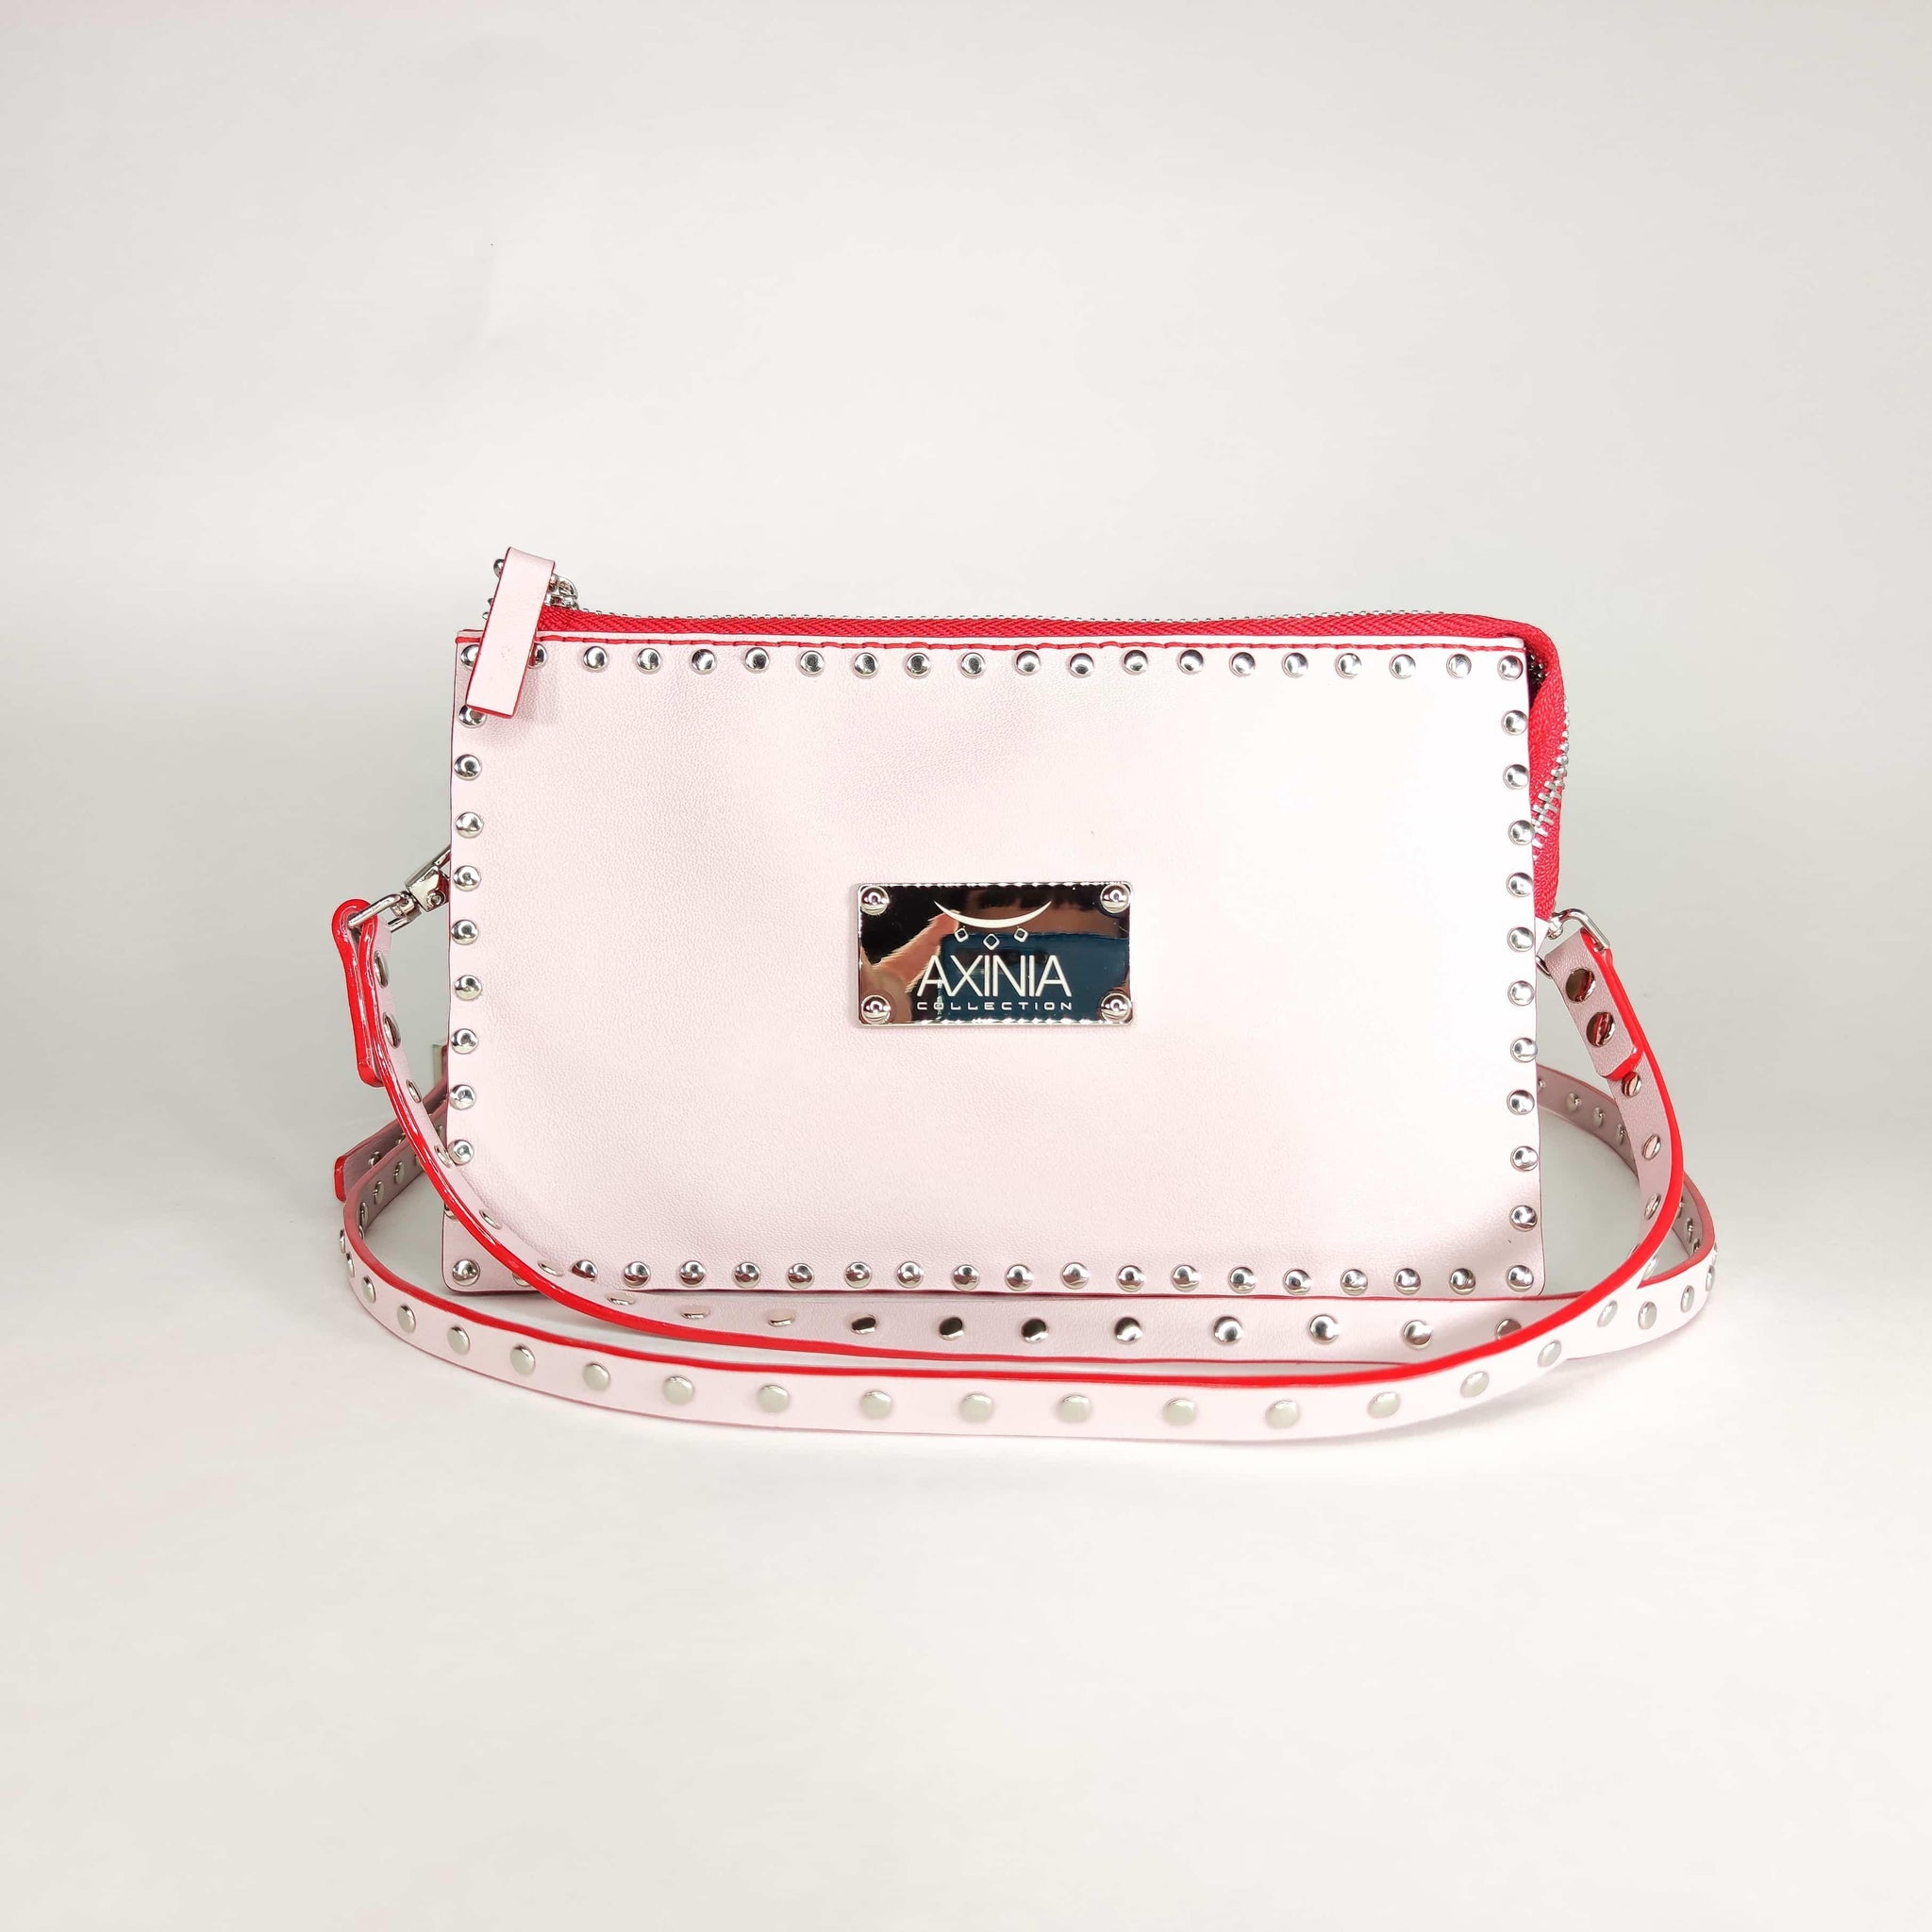 Axinia Clutch Bag With Wings and Rivets